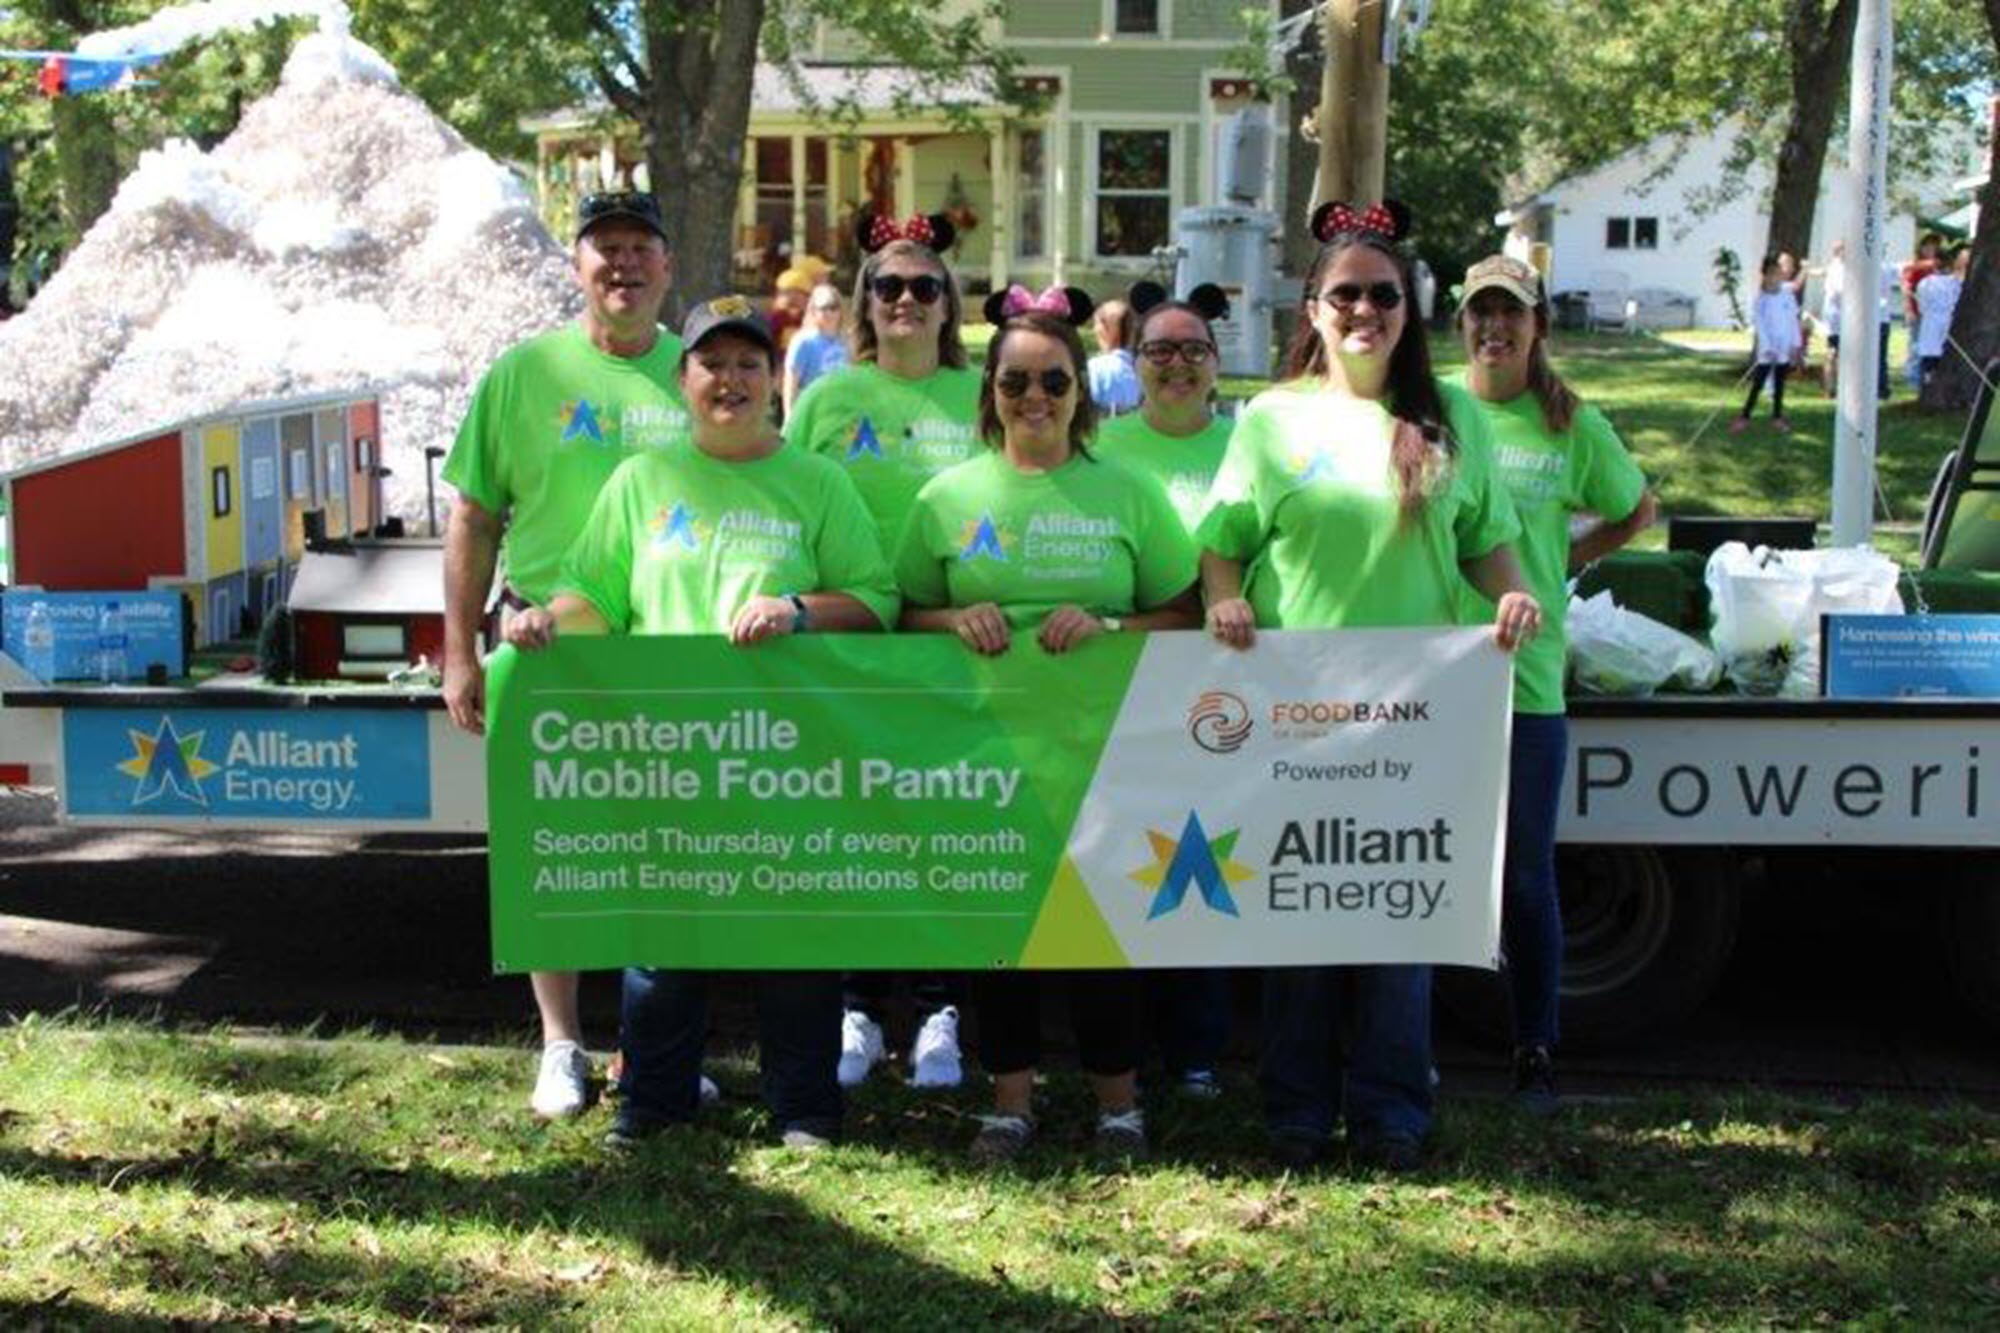 Centerville Mobile Food Pantry